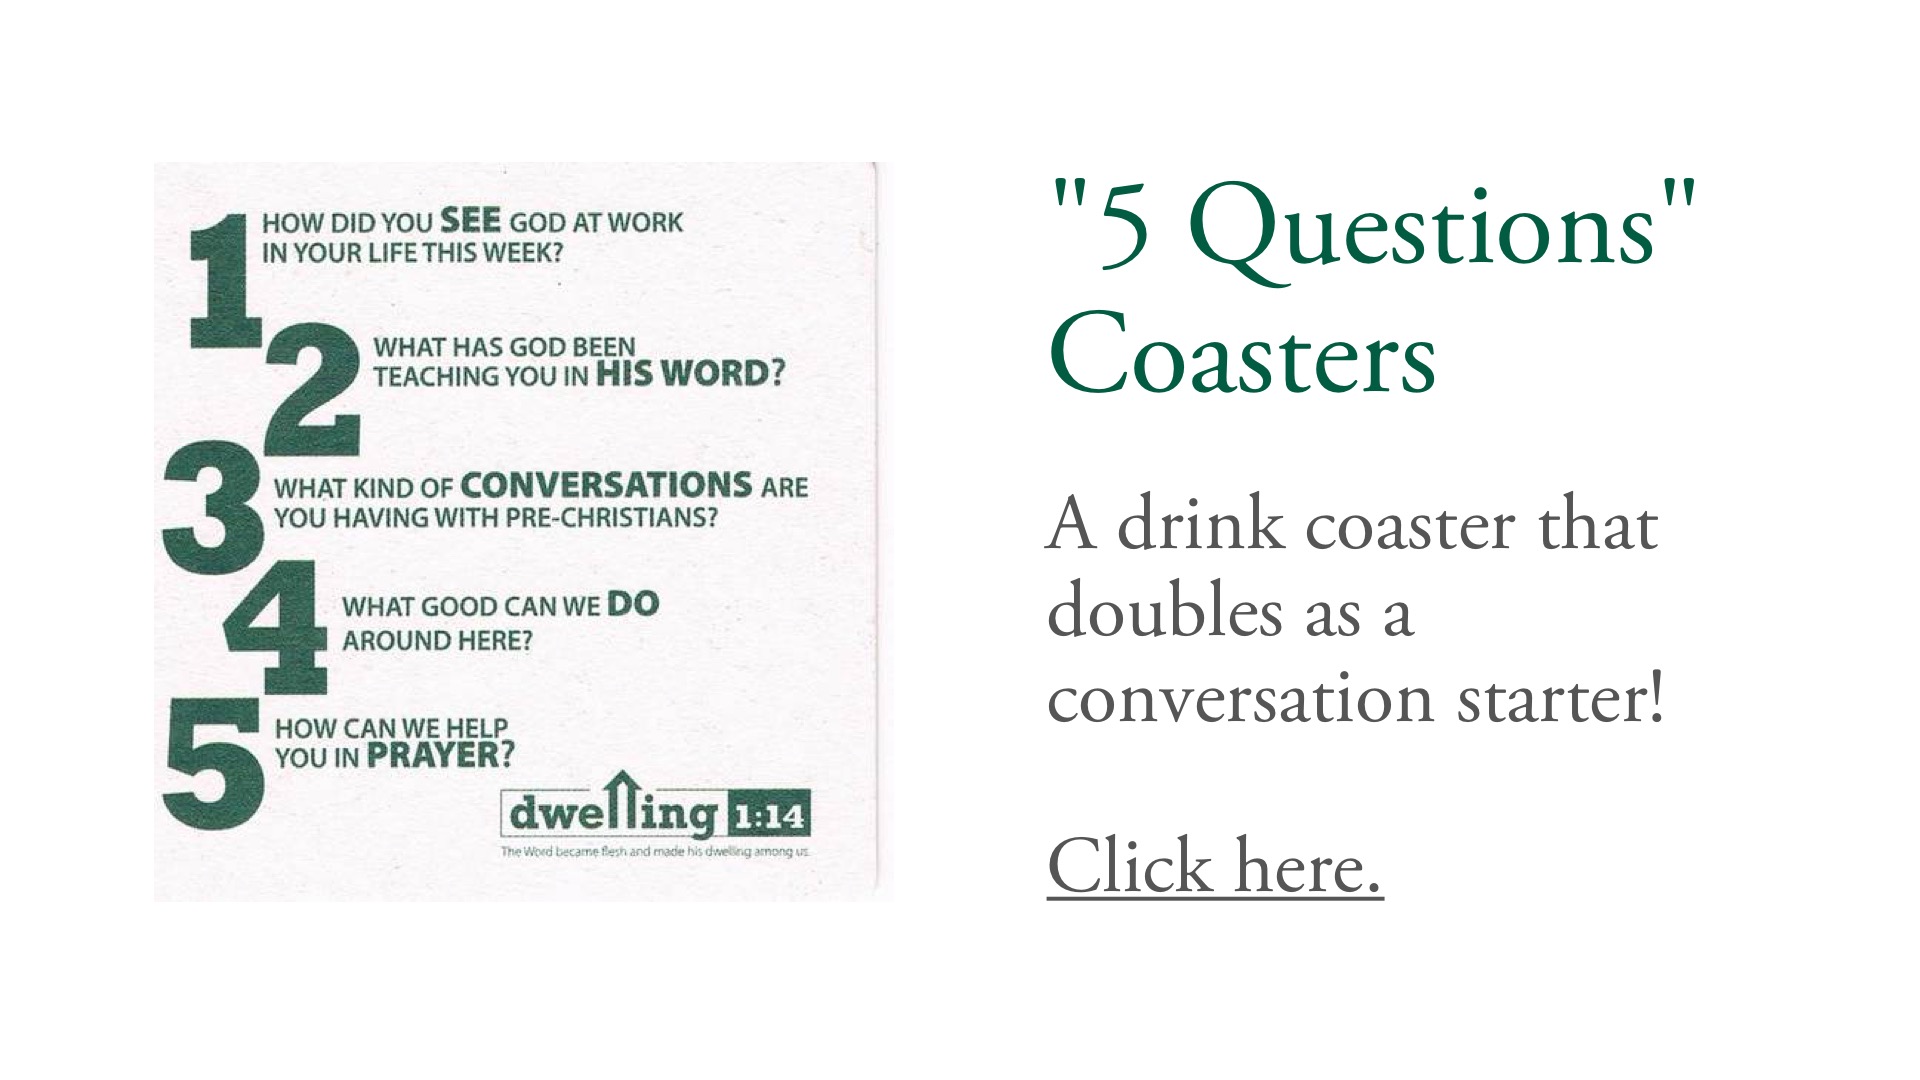 "5 Questions" Coasters